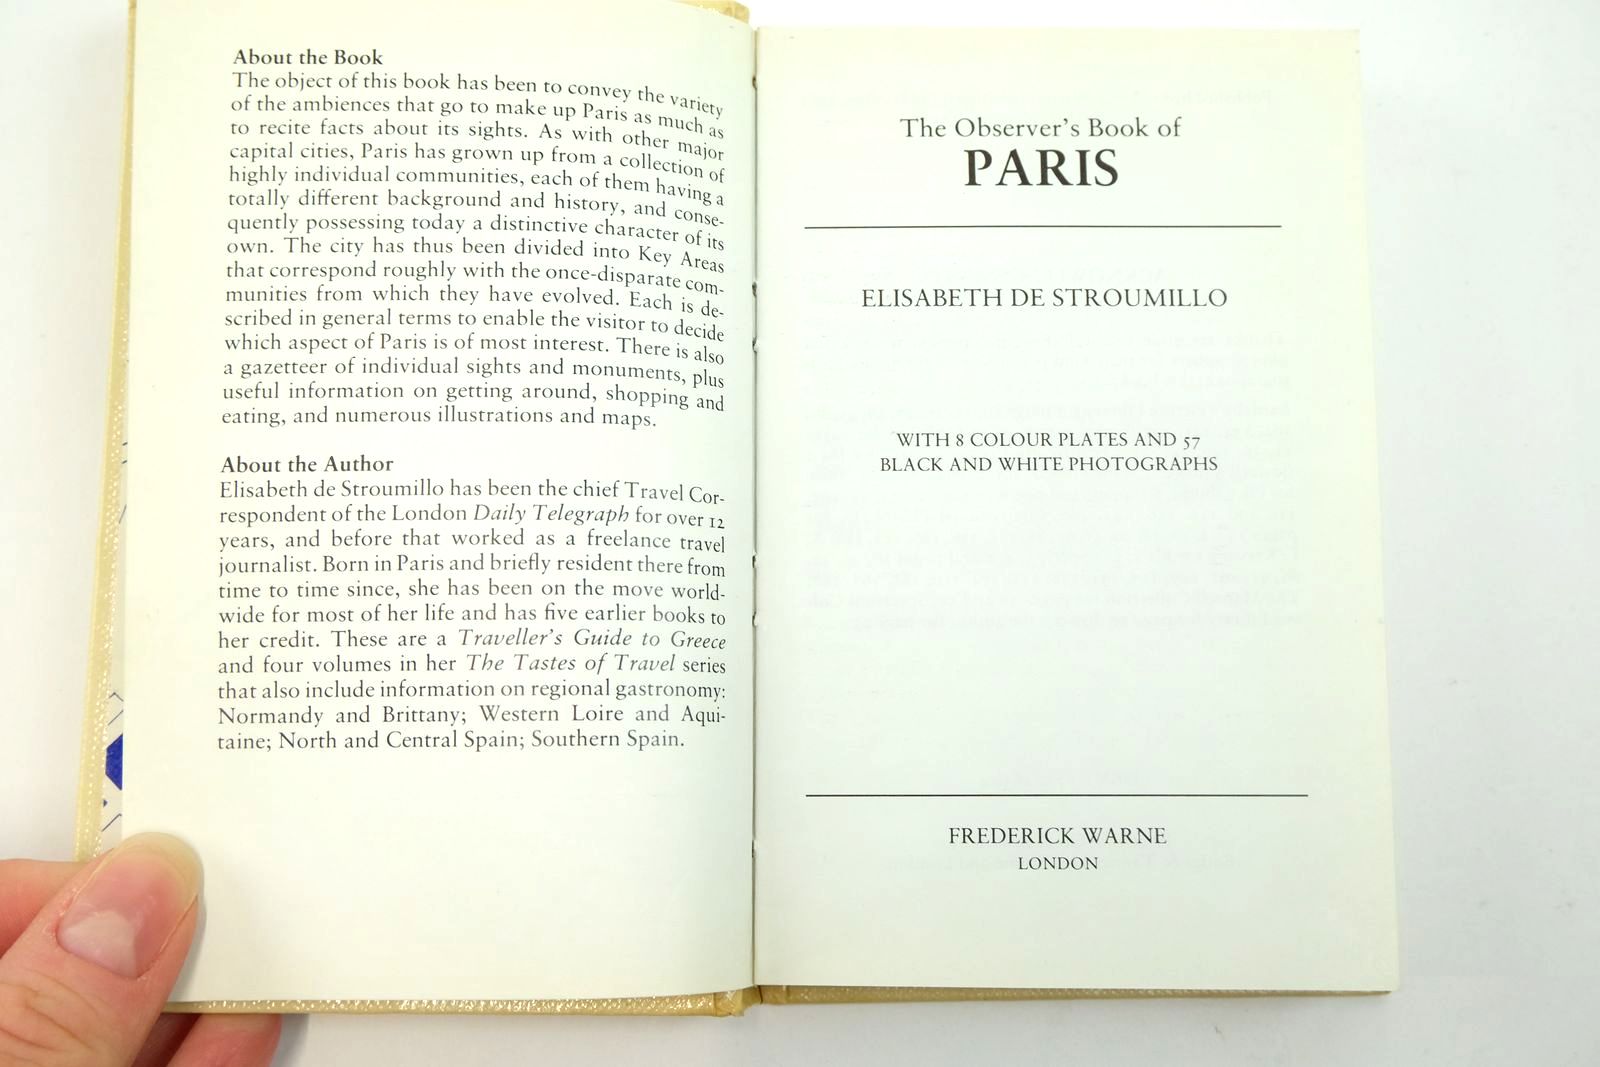 Photo of THE OBSERVER'S BOOK OF PARIS written by De Stroumillo, Elisabeth published by Frederick Warne & Co Ltd. (STOCK CODE: 2139673)  for sale by Stella & Rose's Books